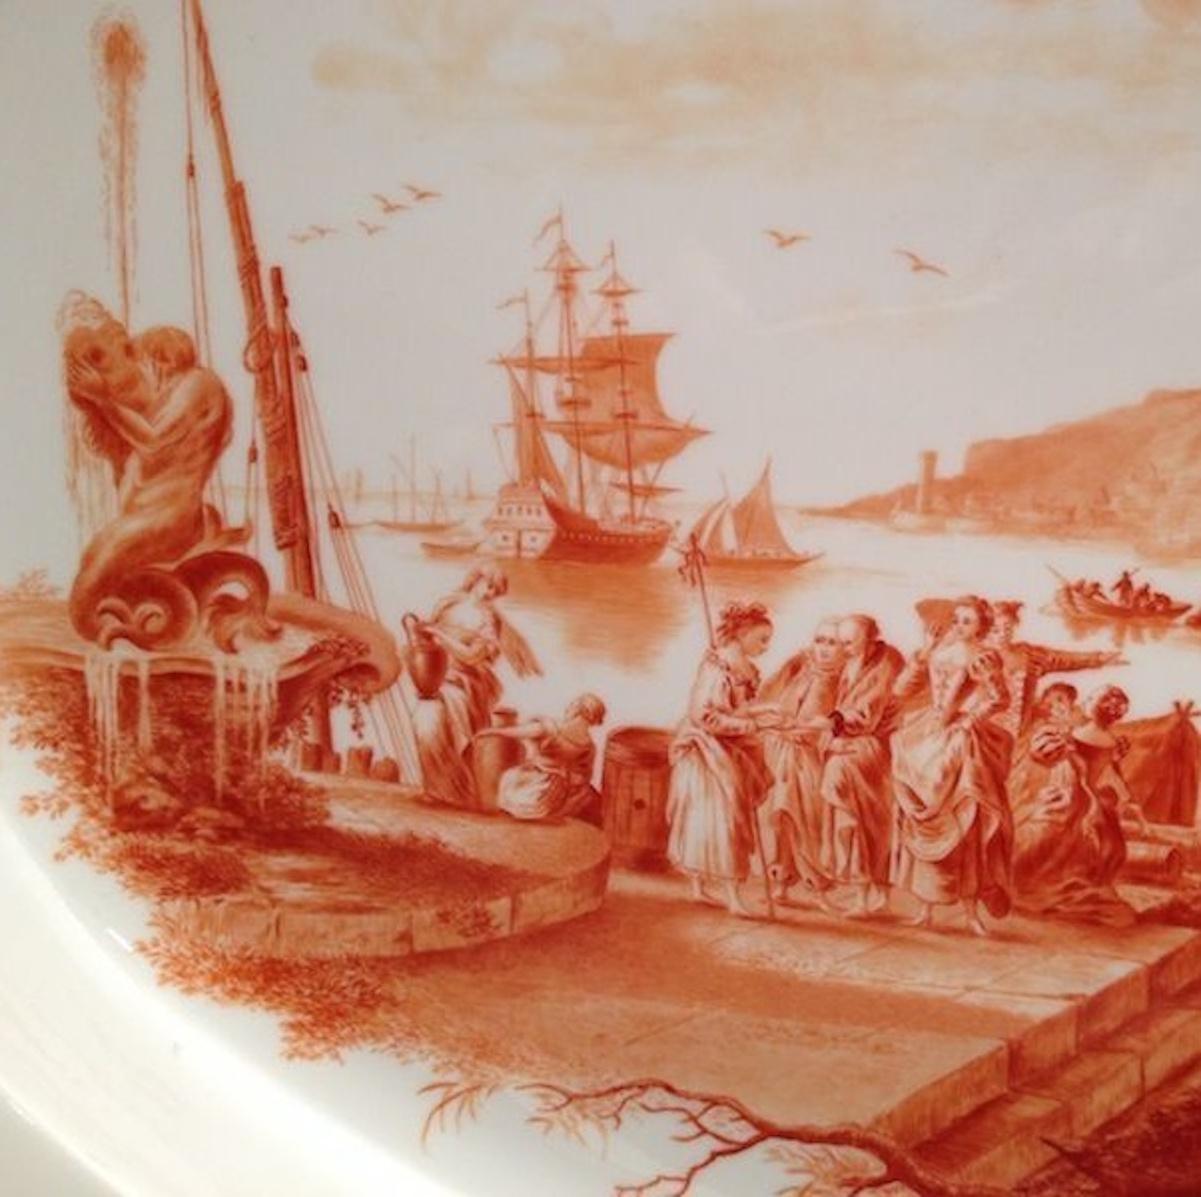 Extraordinary large and beautifully painted platter. The painting in rust red camaieu style, extremely detailed and well done. Depicting some harbour scene with lots of figures.

Made in the 1930s (so called Pfeiffer period).

First choice.